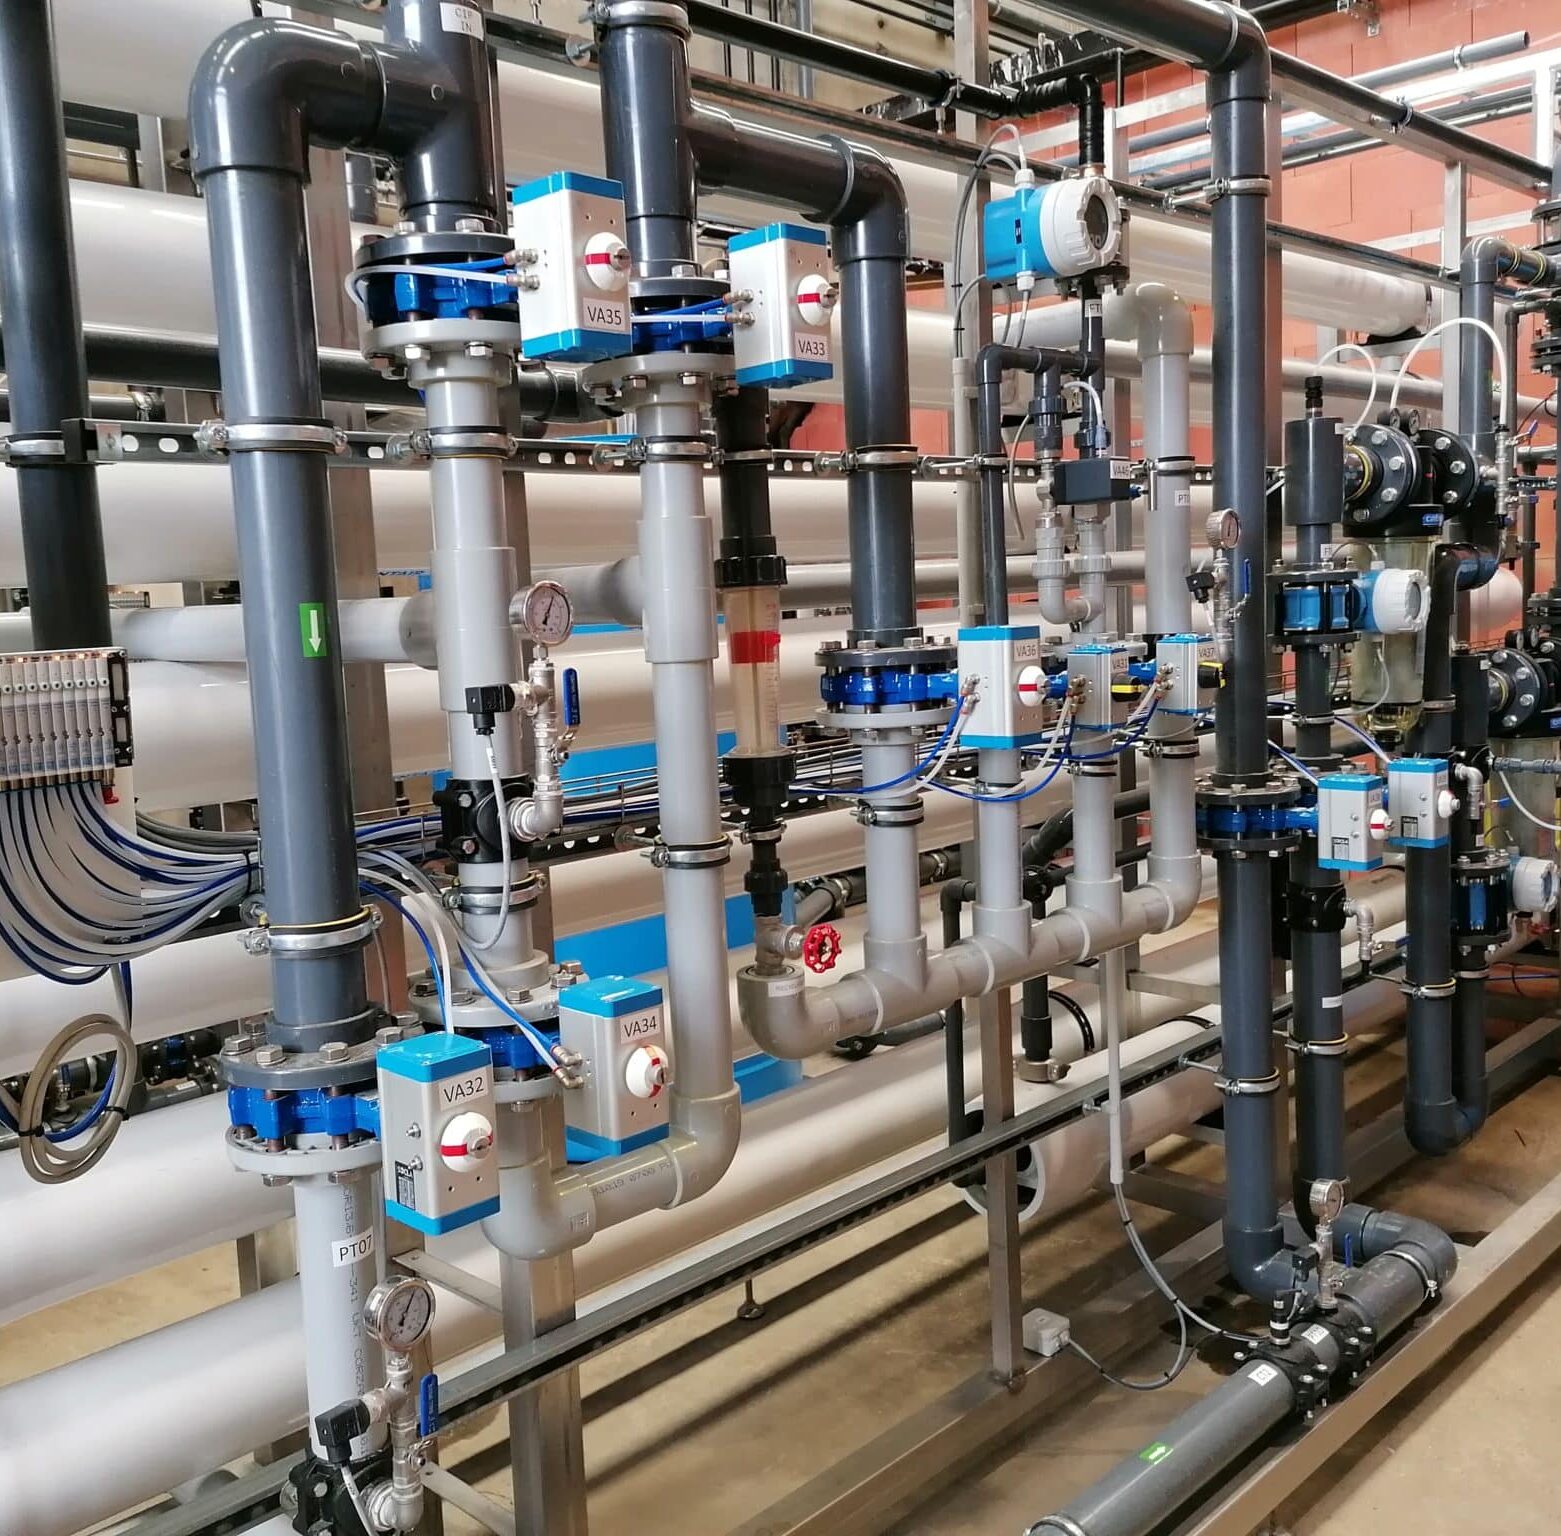 Water reuse installation with RO membrane filtration